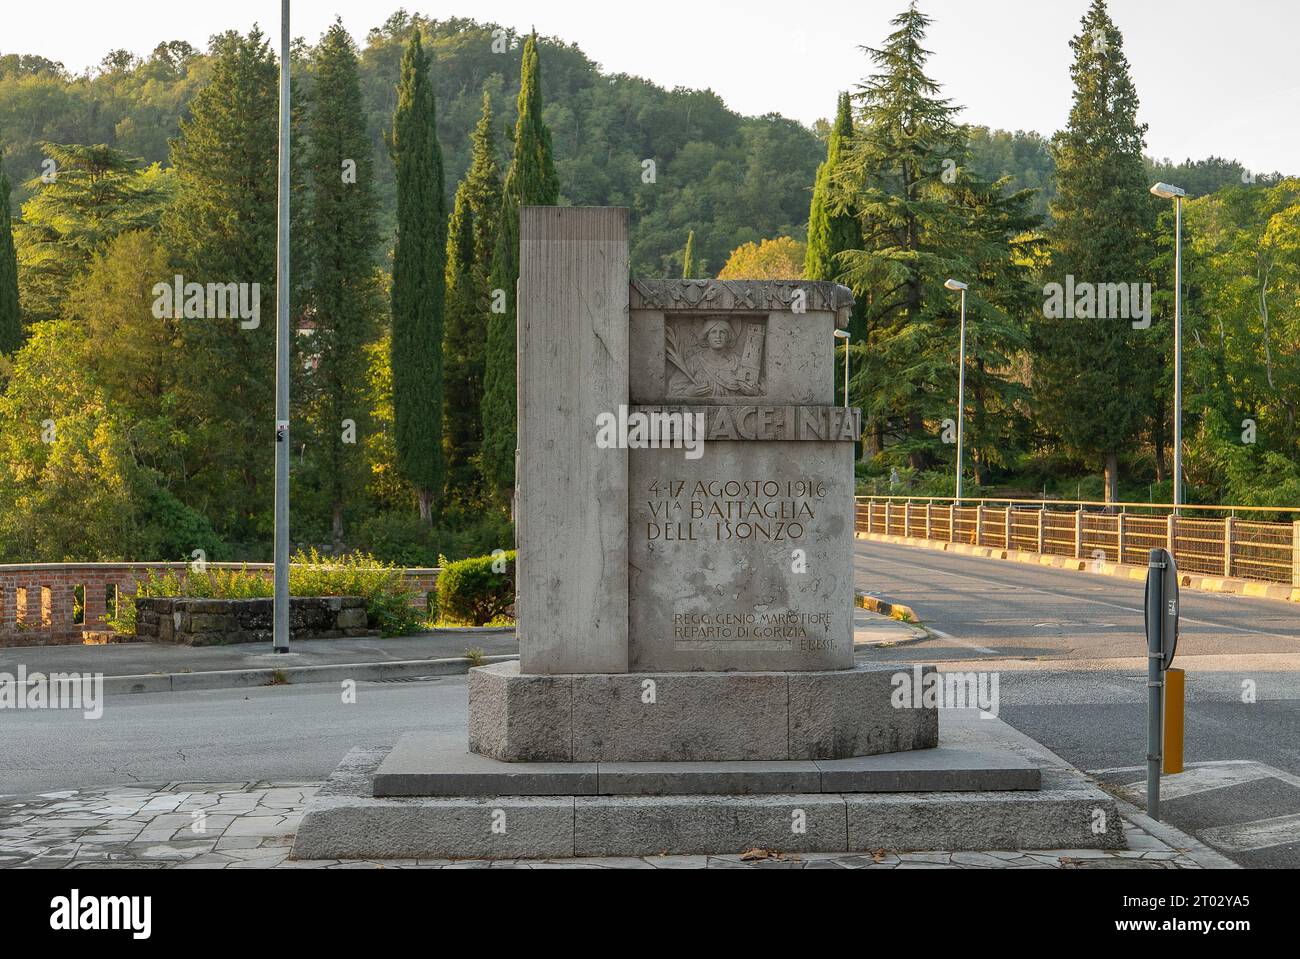 Gorizia, Italy - Stone monument of the Fascist Era dedicated to the battles of the italian army during WW1 on the river Isonzo (Soca) Stock Photo